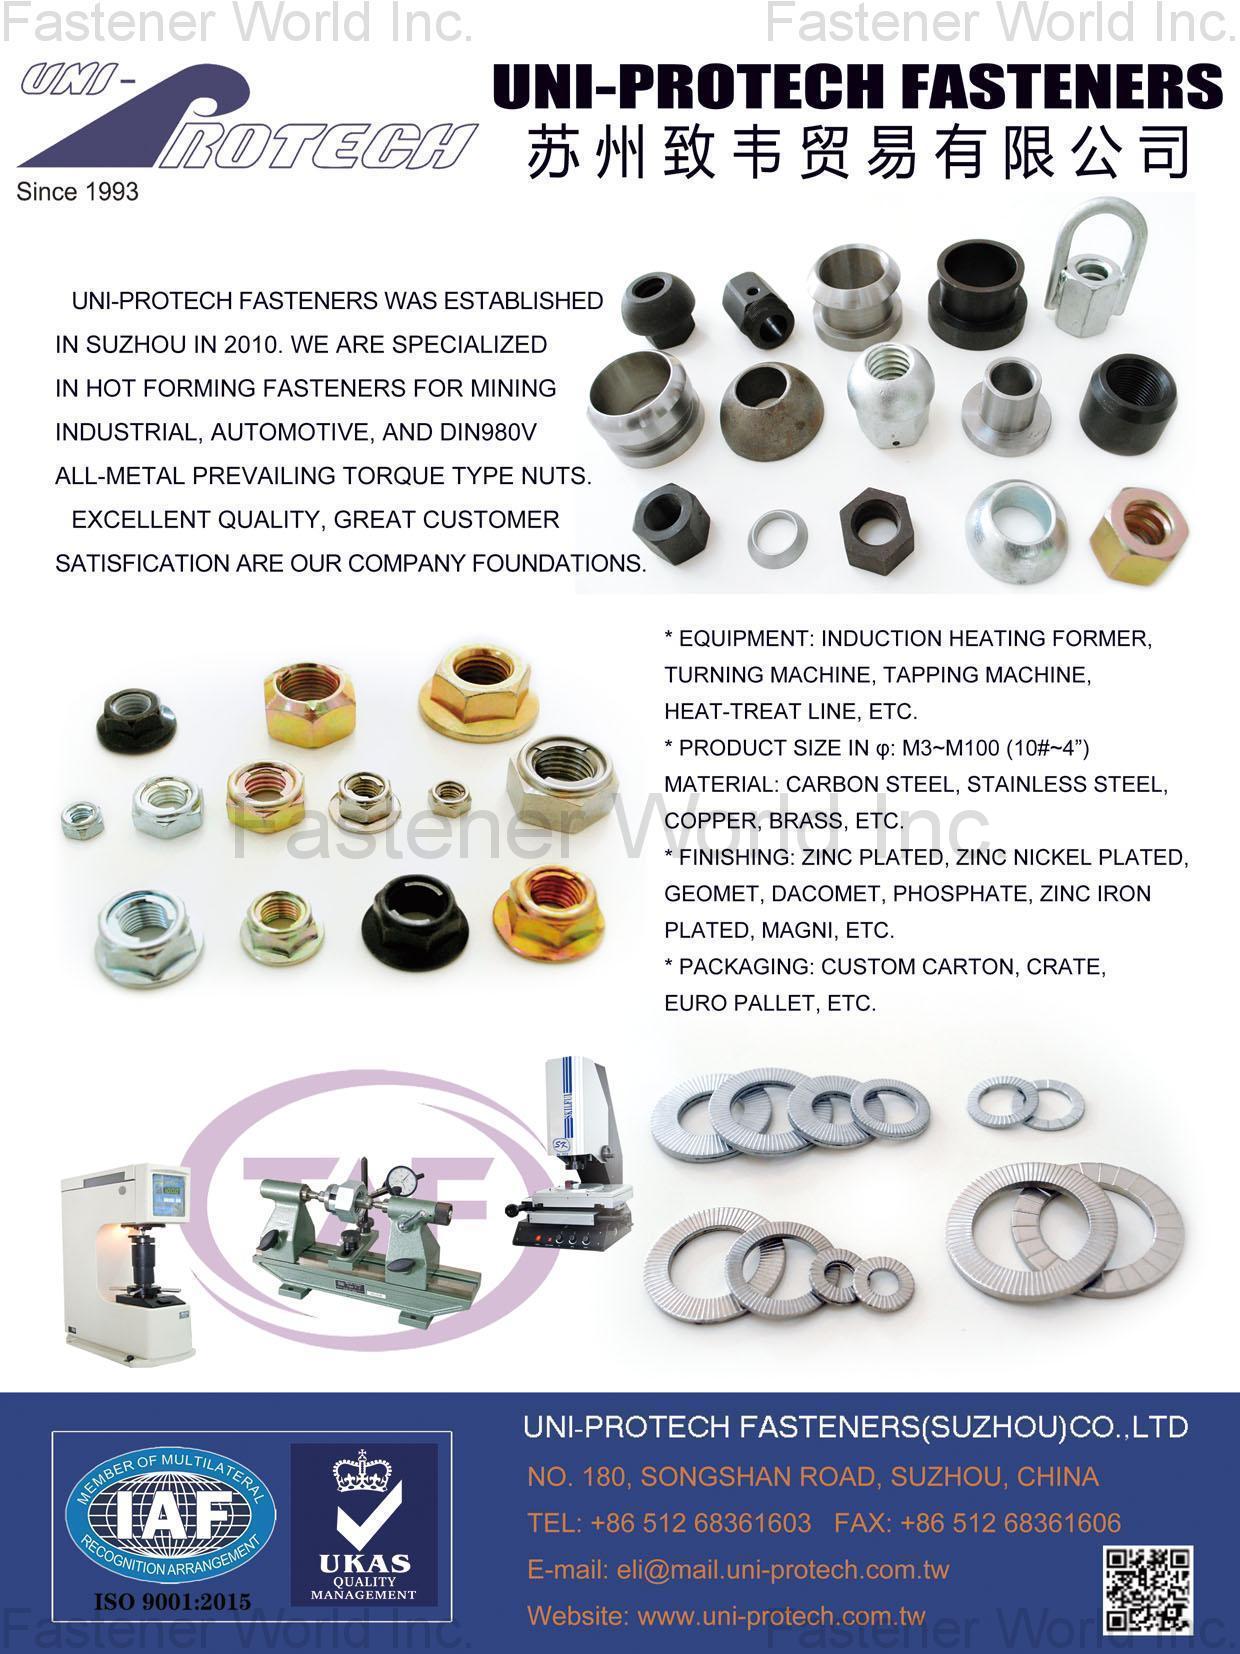 UNI-PROTECH FASTENERS (SUZHOU) CO., LTD. , Precision Turning Parts, Engine Parts of Lawn Mower, Parts for Automotive Industrial, Pushing Rods, Coupling Nuts, Bolts, Set Screws, Special Components with Complexly Shaped, Prevailing Torque Lock Nuts, DIN 980, 982, 985, 6924, 6927, Ne, Nte, Ntu, U-Nuts, Stamping Parts, Wheel Lug Nuts, Heavy Duty Wheel Nuts, Inner Nuts, Outer Nuts, DIN 74361-A/-B/-F/-H, Slotted Nuts, Castle Nuts, DIN 935, DIN 937, Gym Instruments Parts, Flat Head And Button Head Security Screws, Construction Fasteners, Screws, Bolts, Washers, Nuts, Anchors, Mining Construction Products, Dome Ball Washers, Dome Ball, Washer 